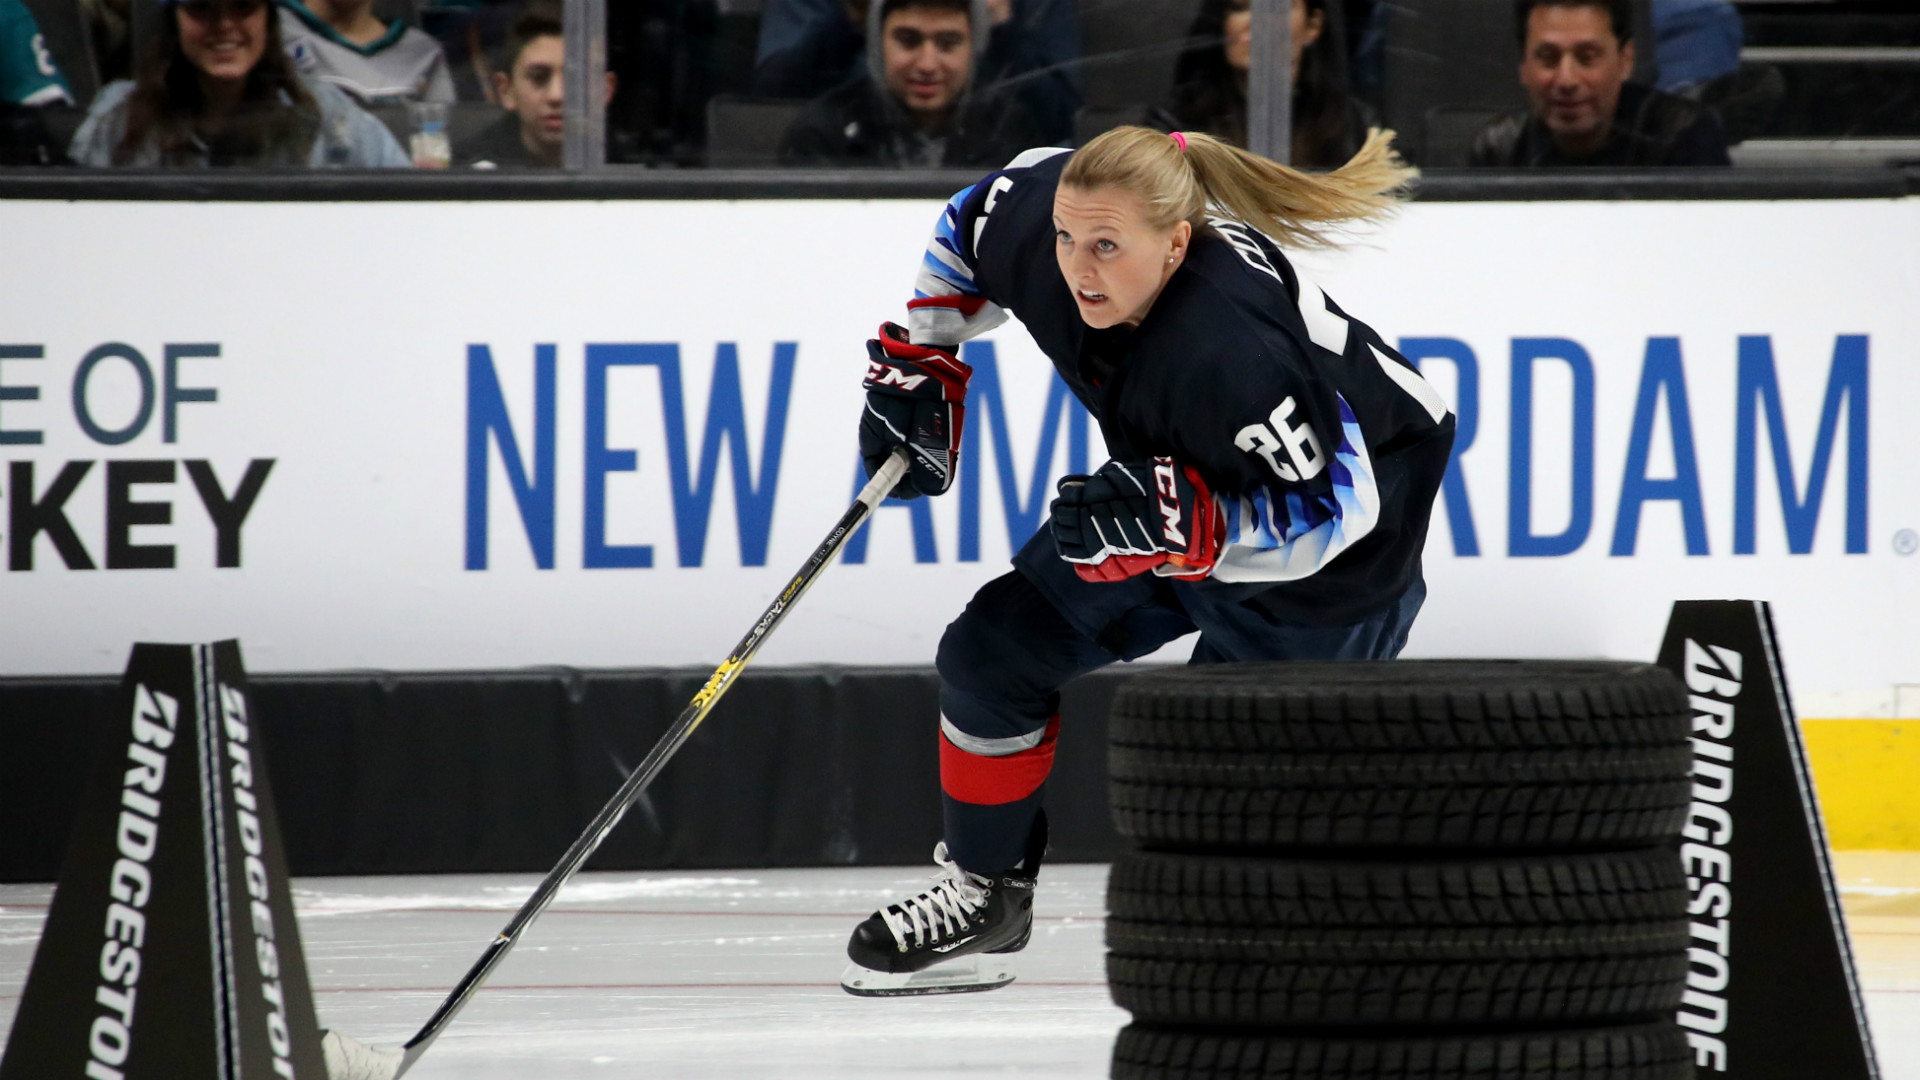 NHL All-Star Game 2019: Kendall Coyne Schofield reflects on 'surreal' skills ...1920 x 1080